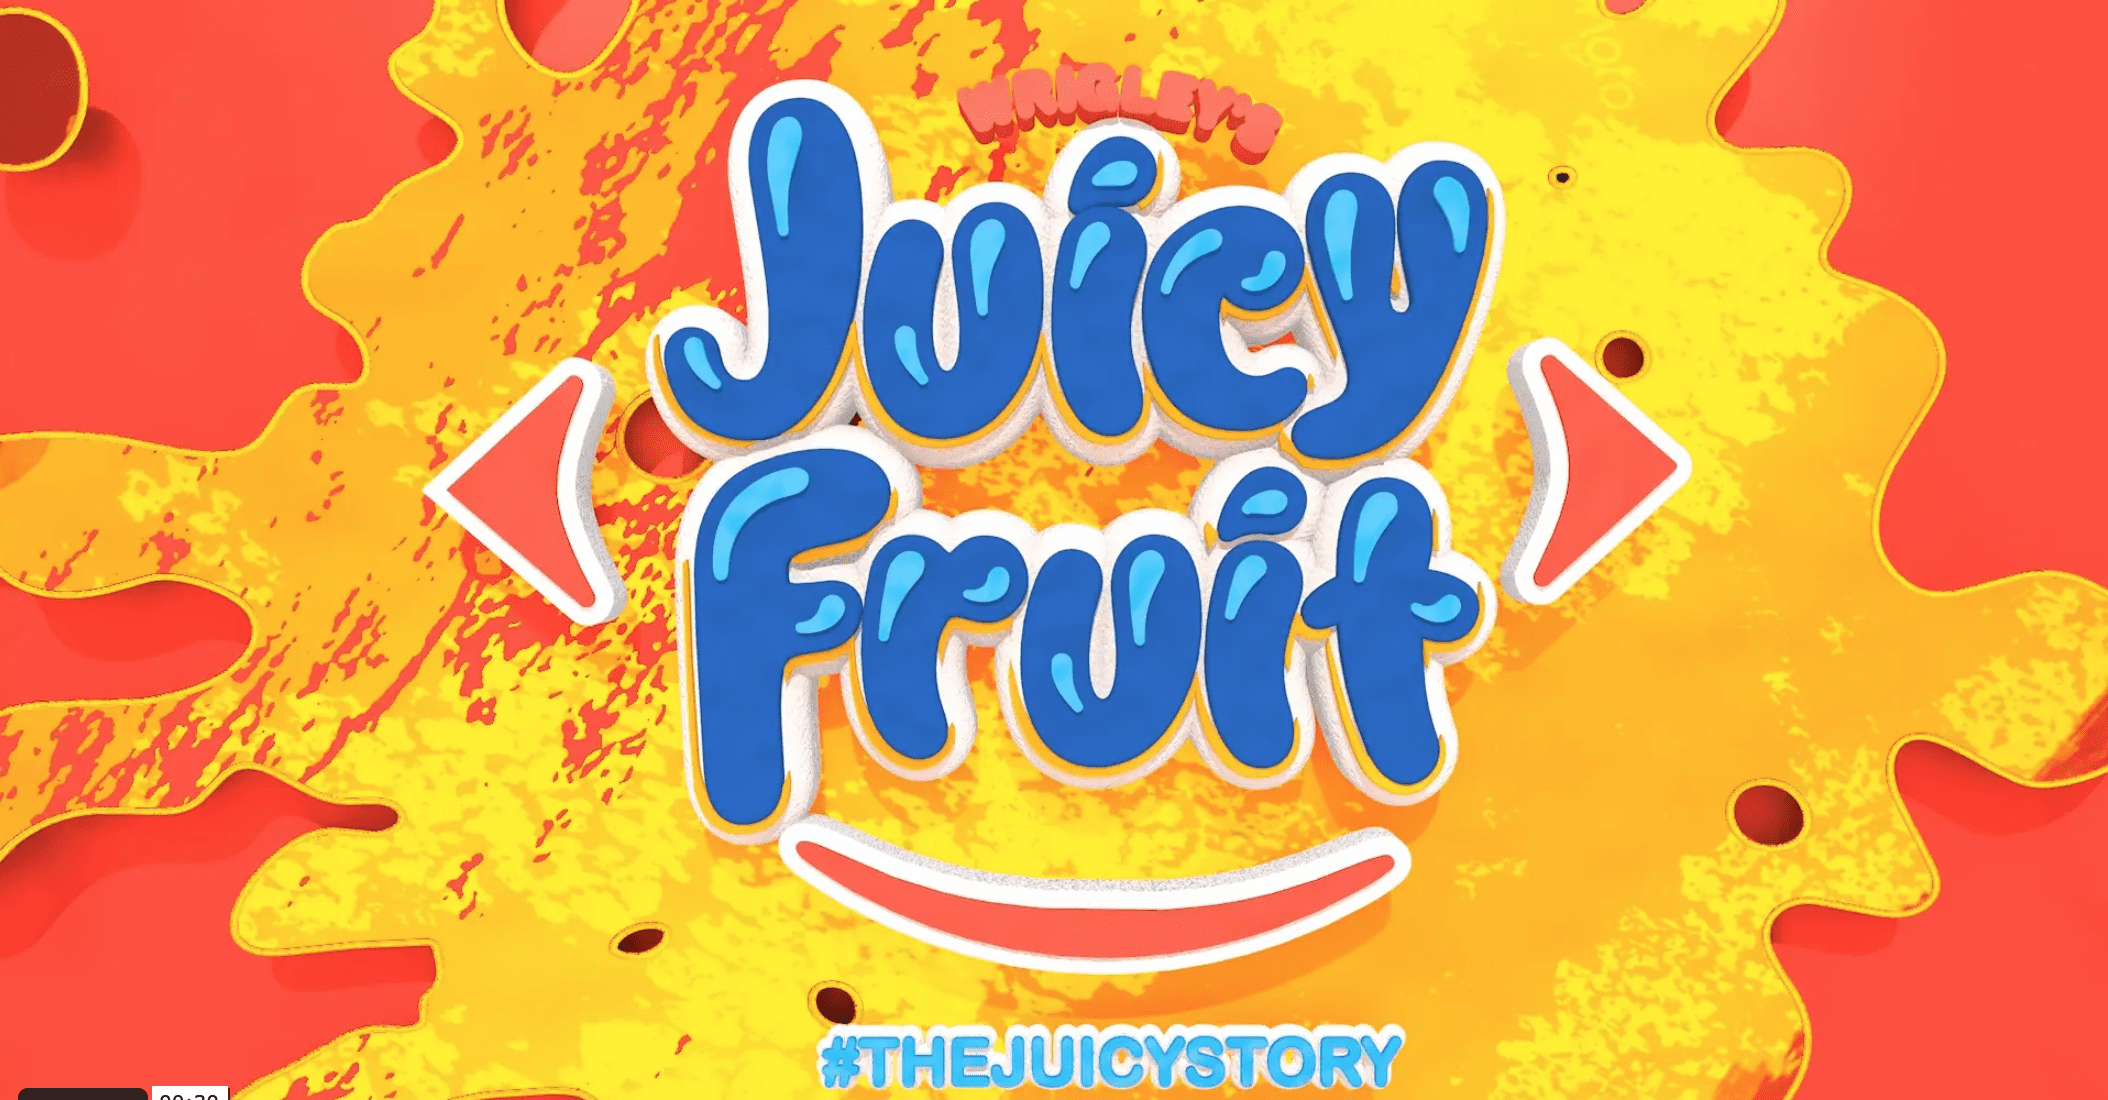 Digital ad for Juicy Fruit gum. The company name is written in large blue bubble letters with a red smile underneath. Behind it is a large yellow splash on a red background. At the bottom is a blue hashtag that says "#the juicy story".